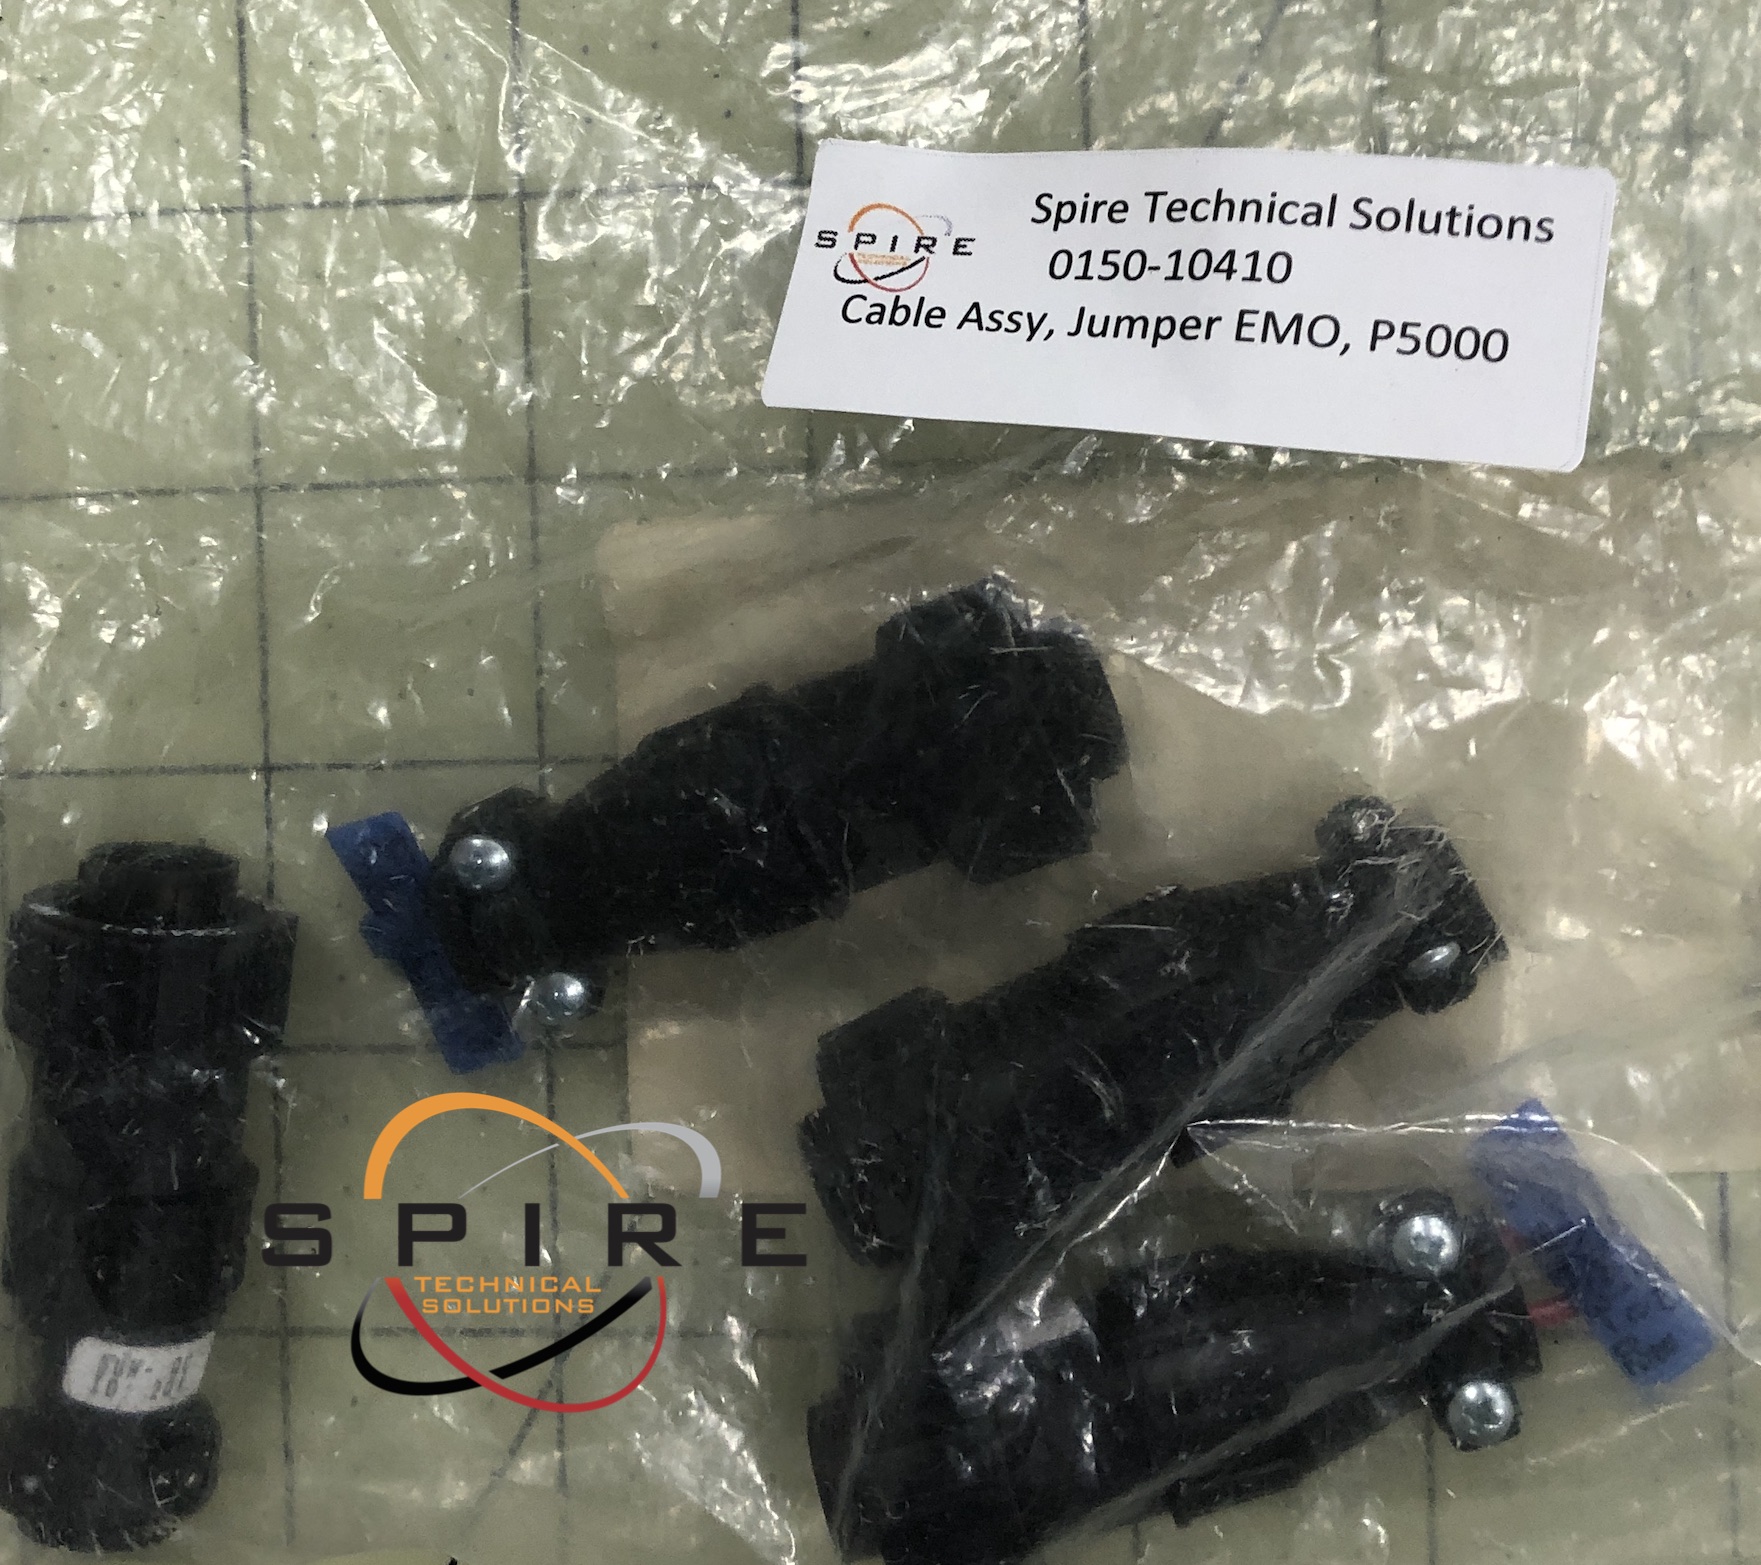 Cable Assy, Jumper EMO, P5000